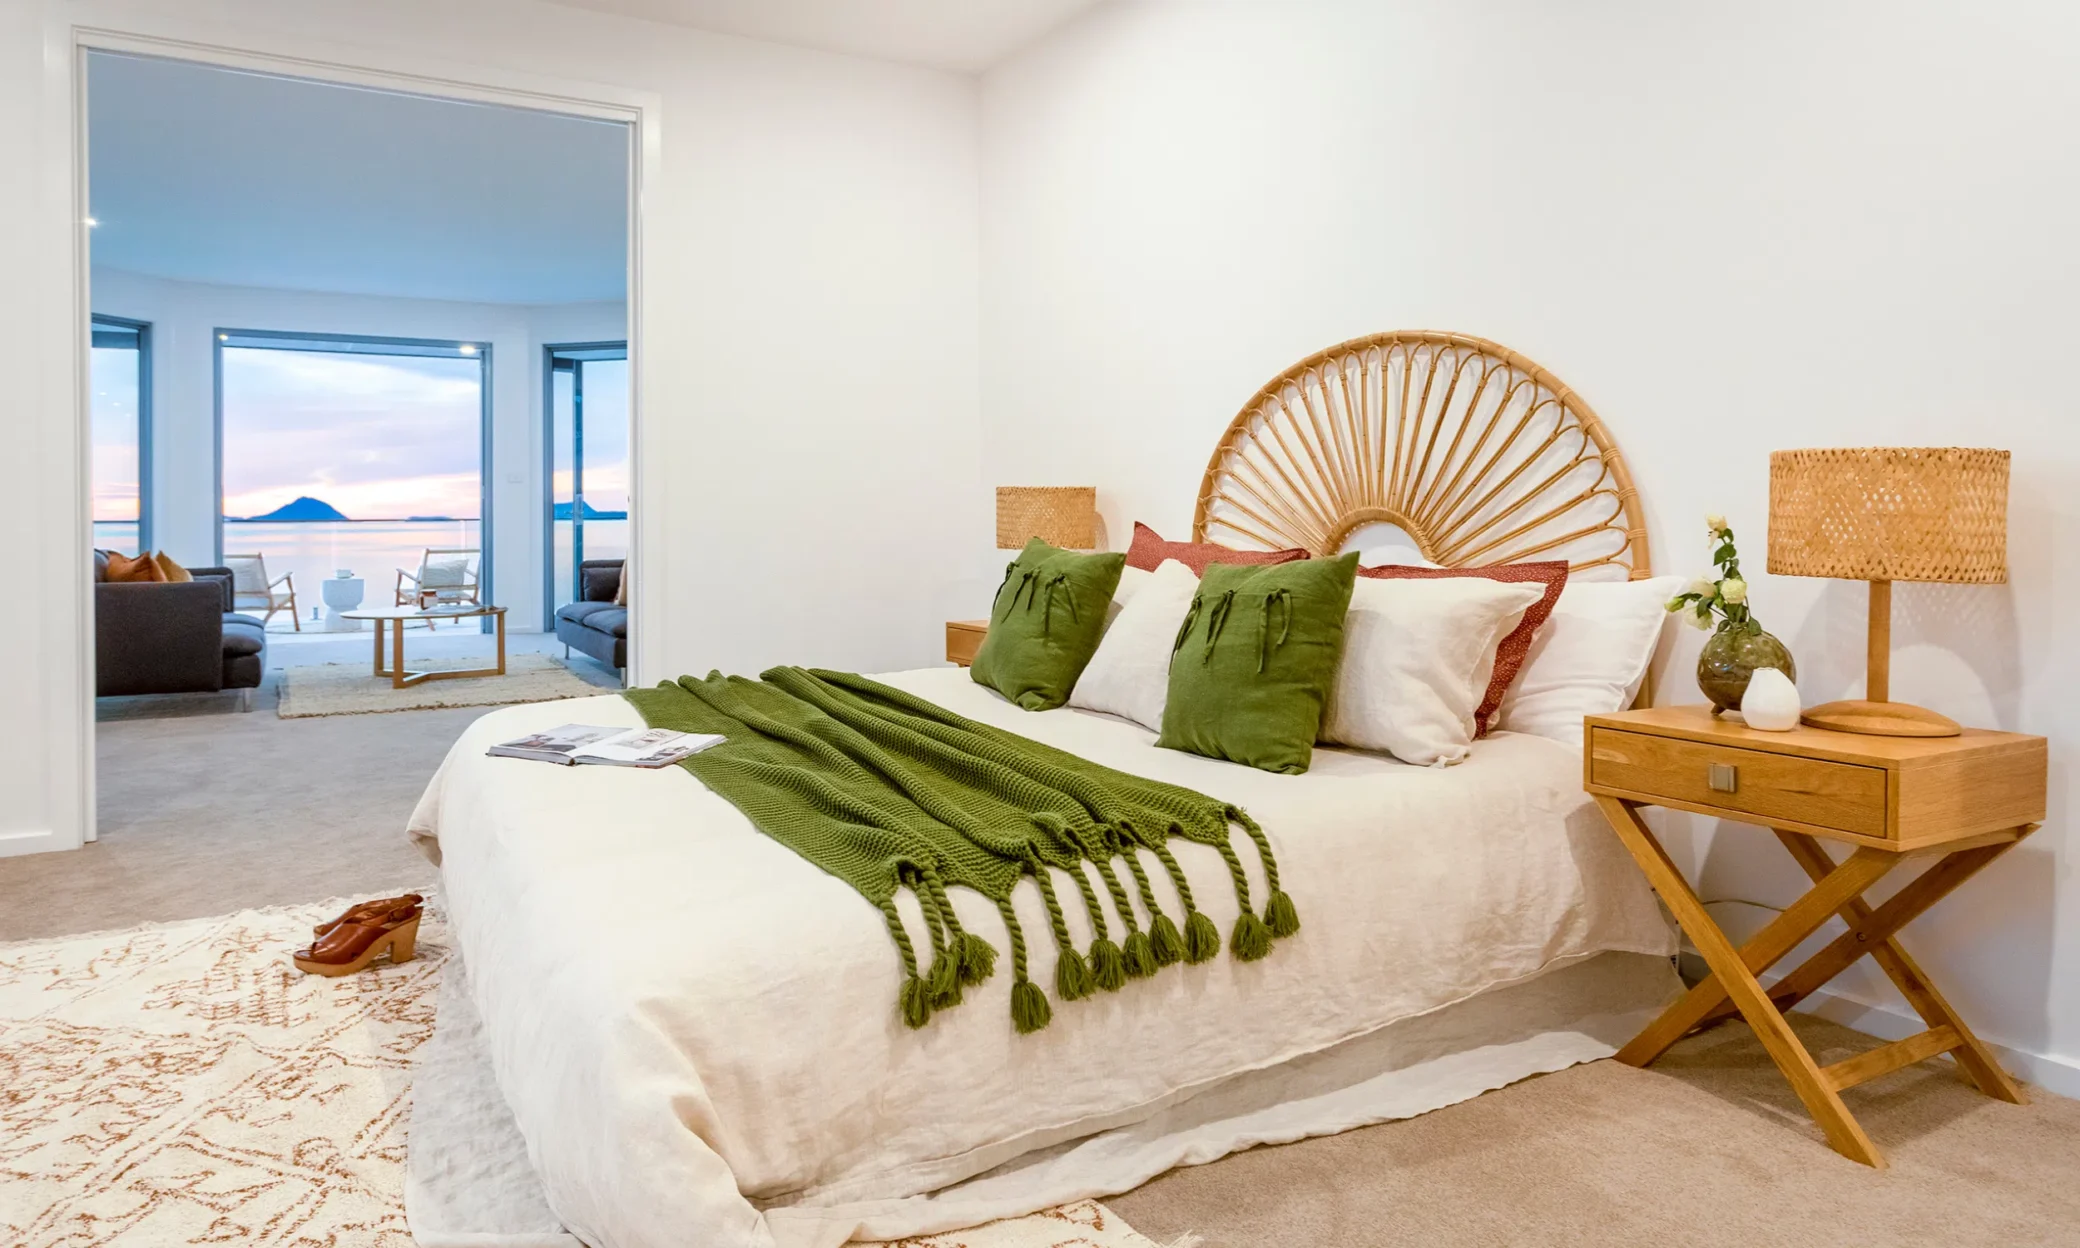 A serene bedroom in Nelson Bay with a large bed adorned with white and green cushions and a green throw, a rattan headboard, bedside table with lamp, a small seating area by a wide open